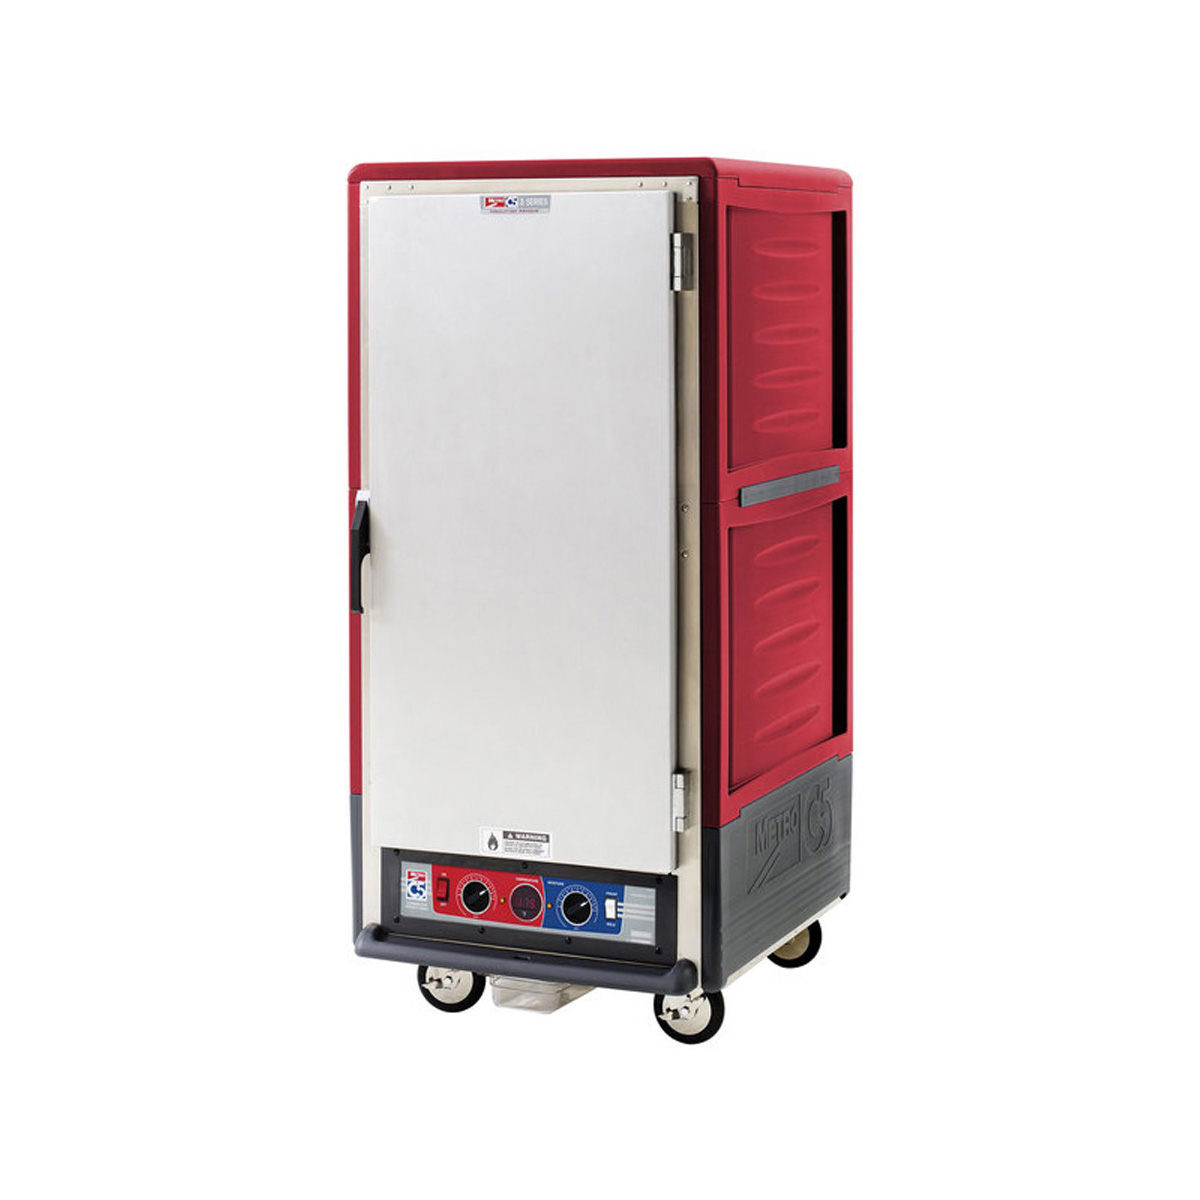 Metro C537-CLFS-U C5 3 Series Insulated Mobile Proofing and Holding Cabinet